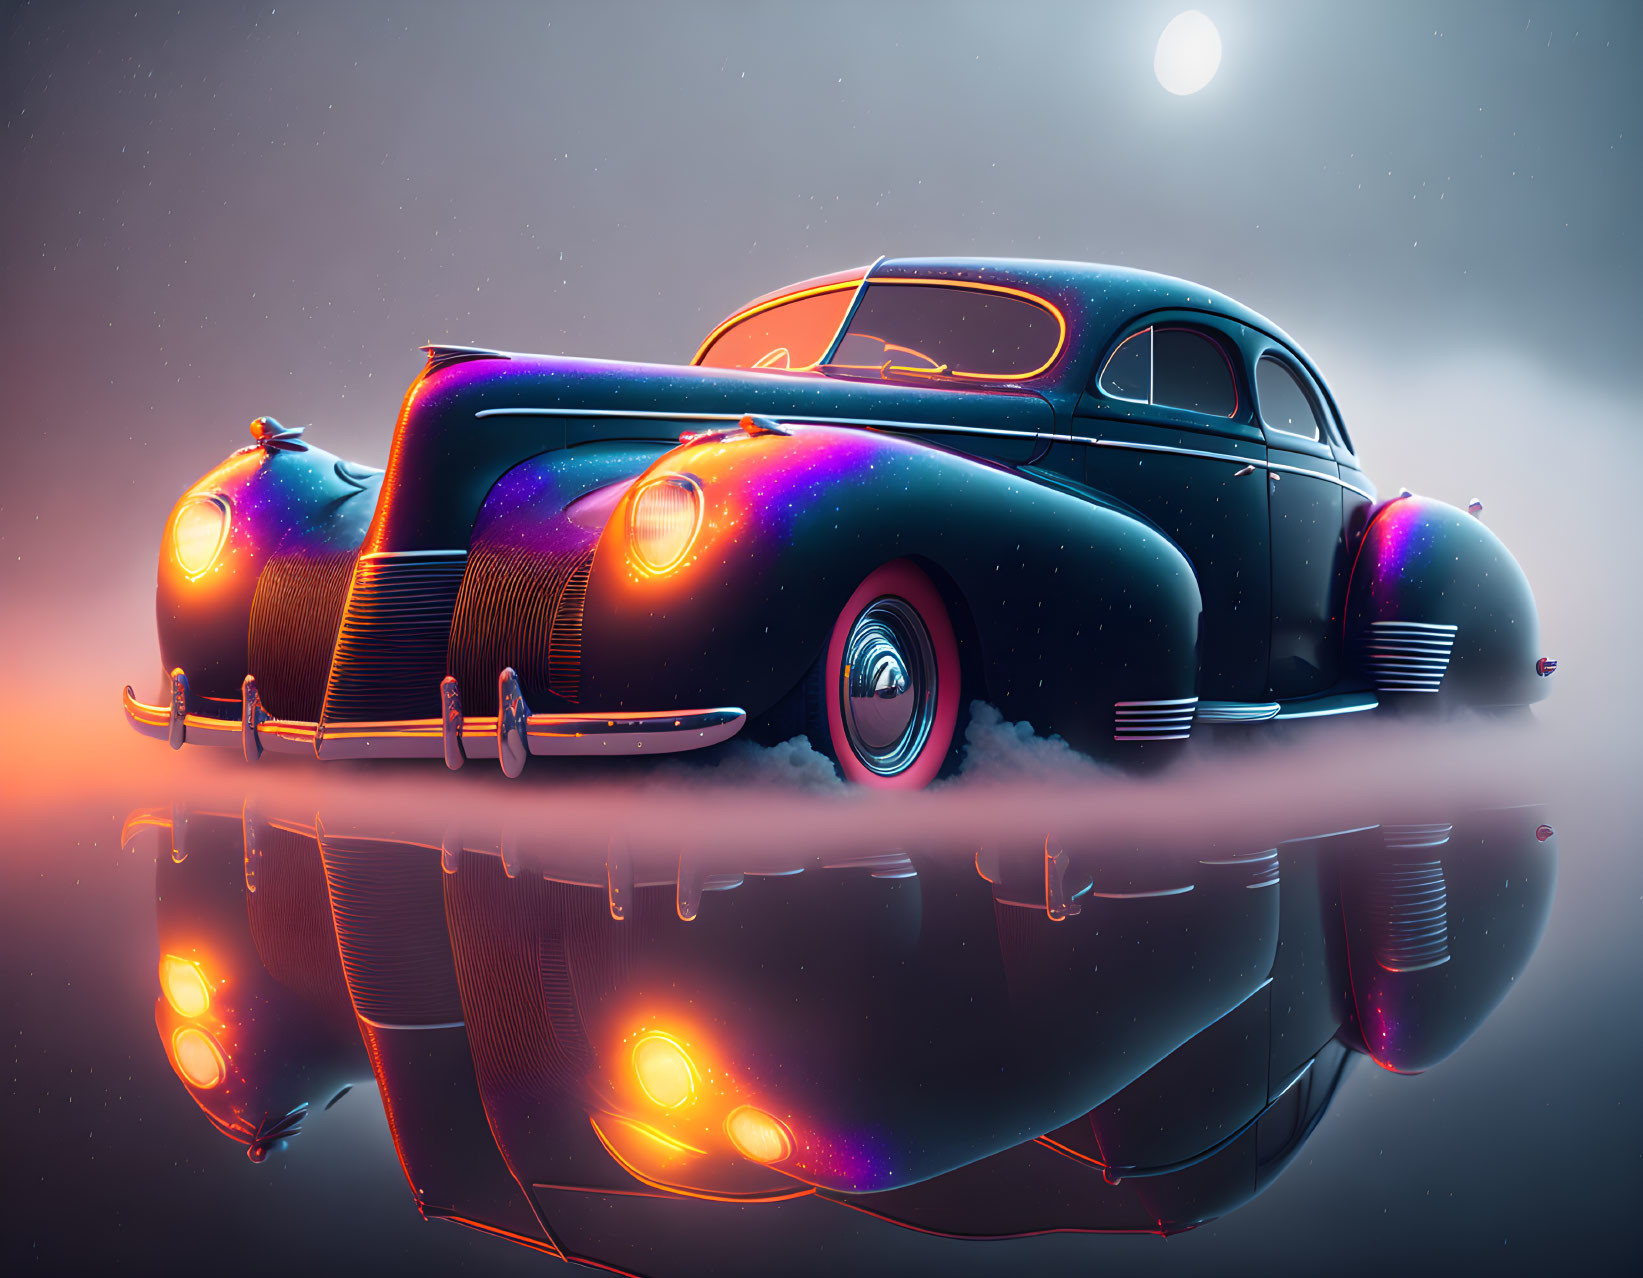 Vintage Car with Galaxy Paint Theme on Reflective Surface under Starry Sky